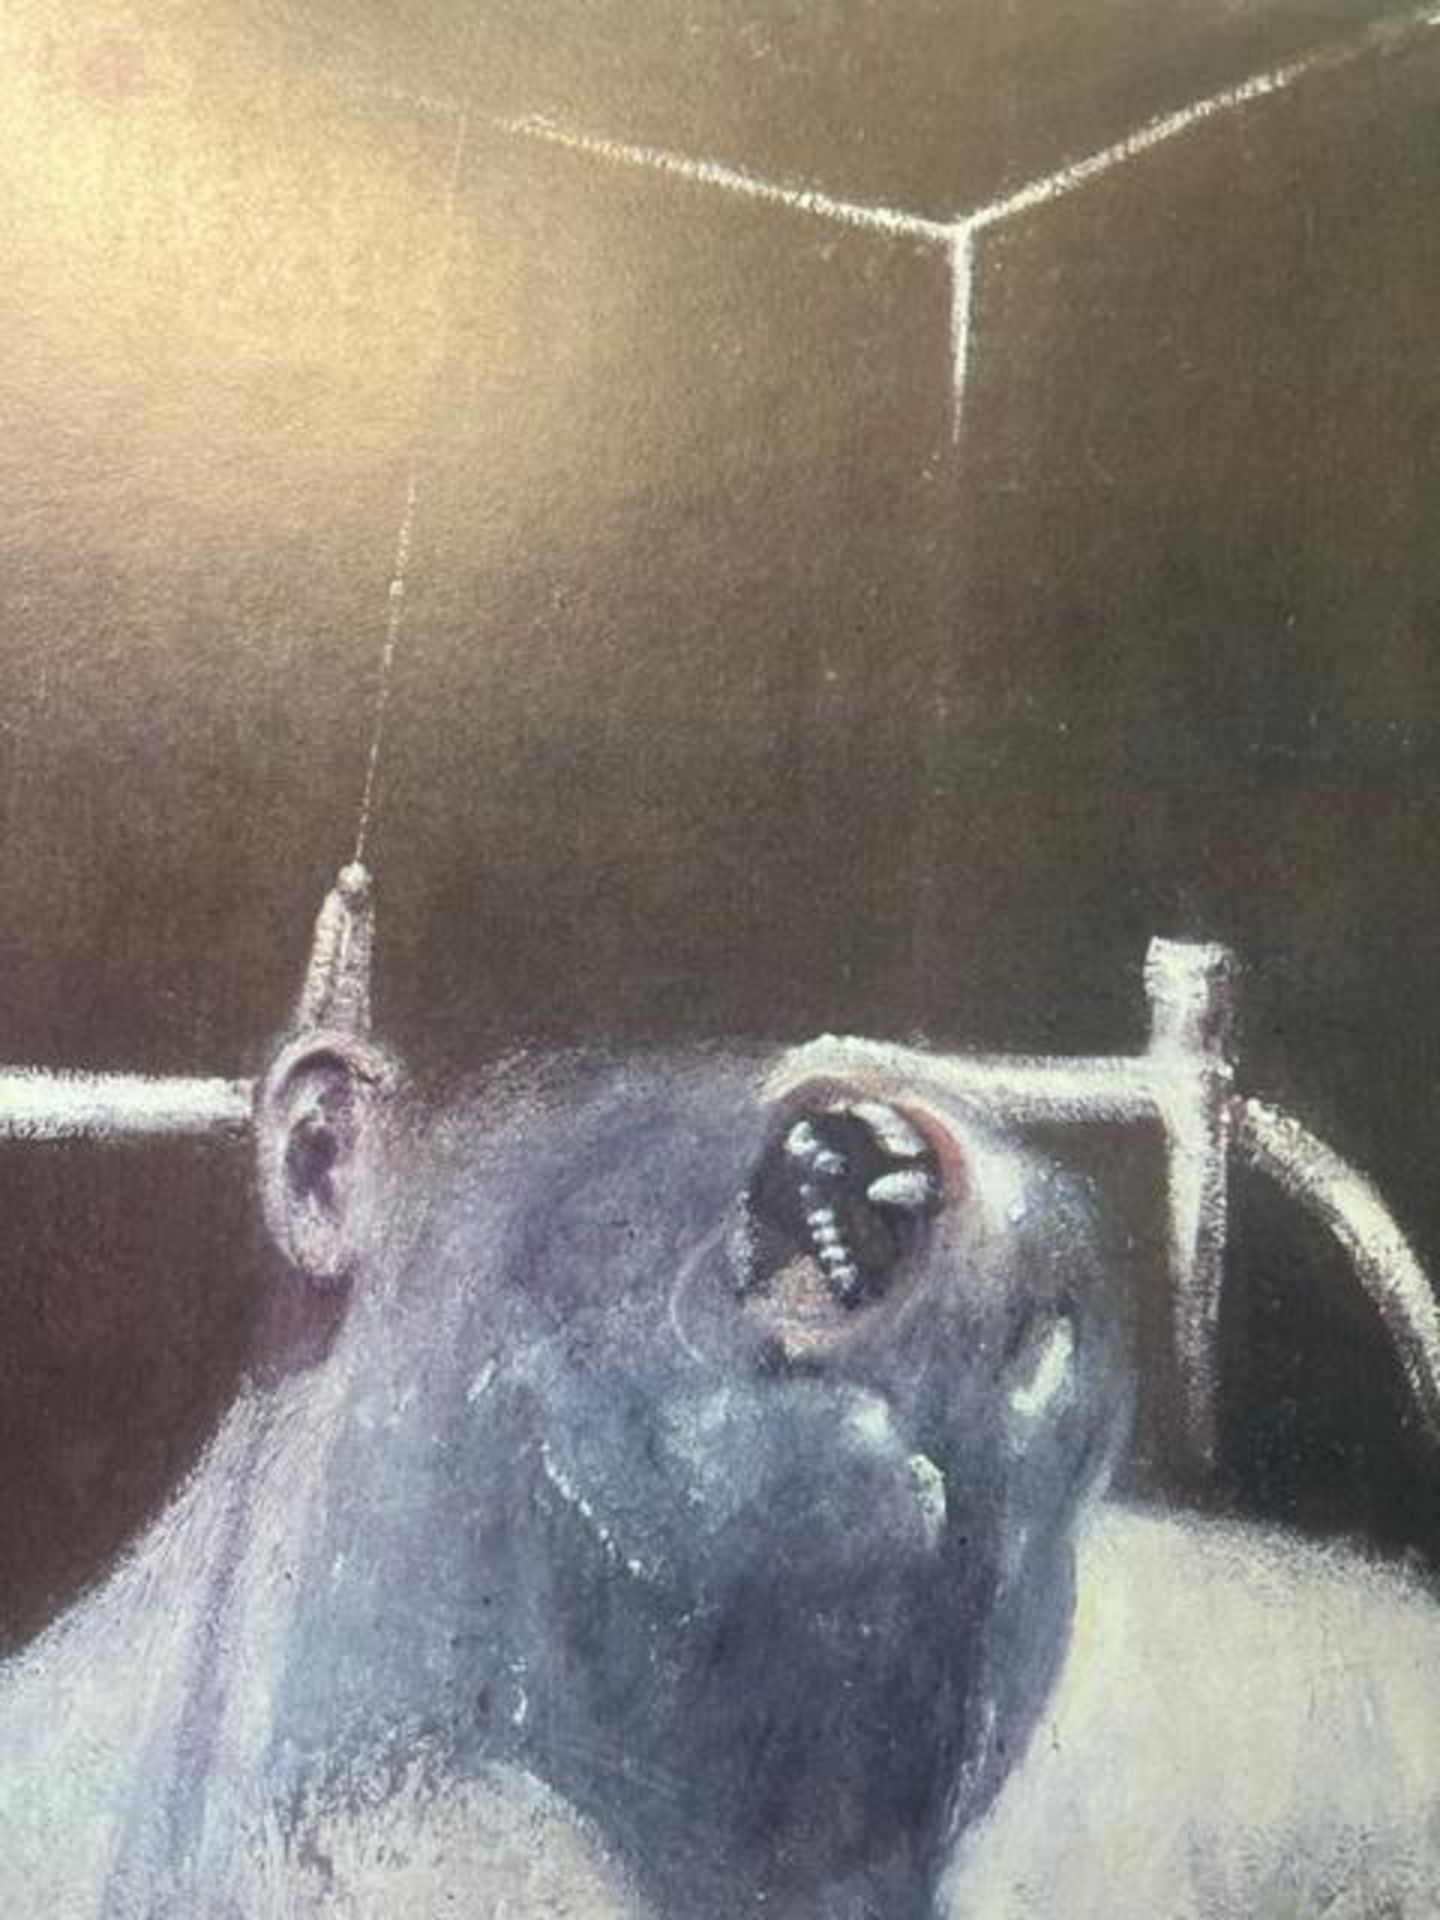 Francis Bacon "Untitled" Print. - Image 2 of 6